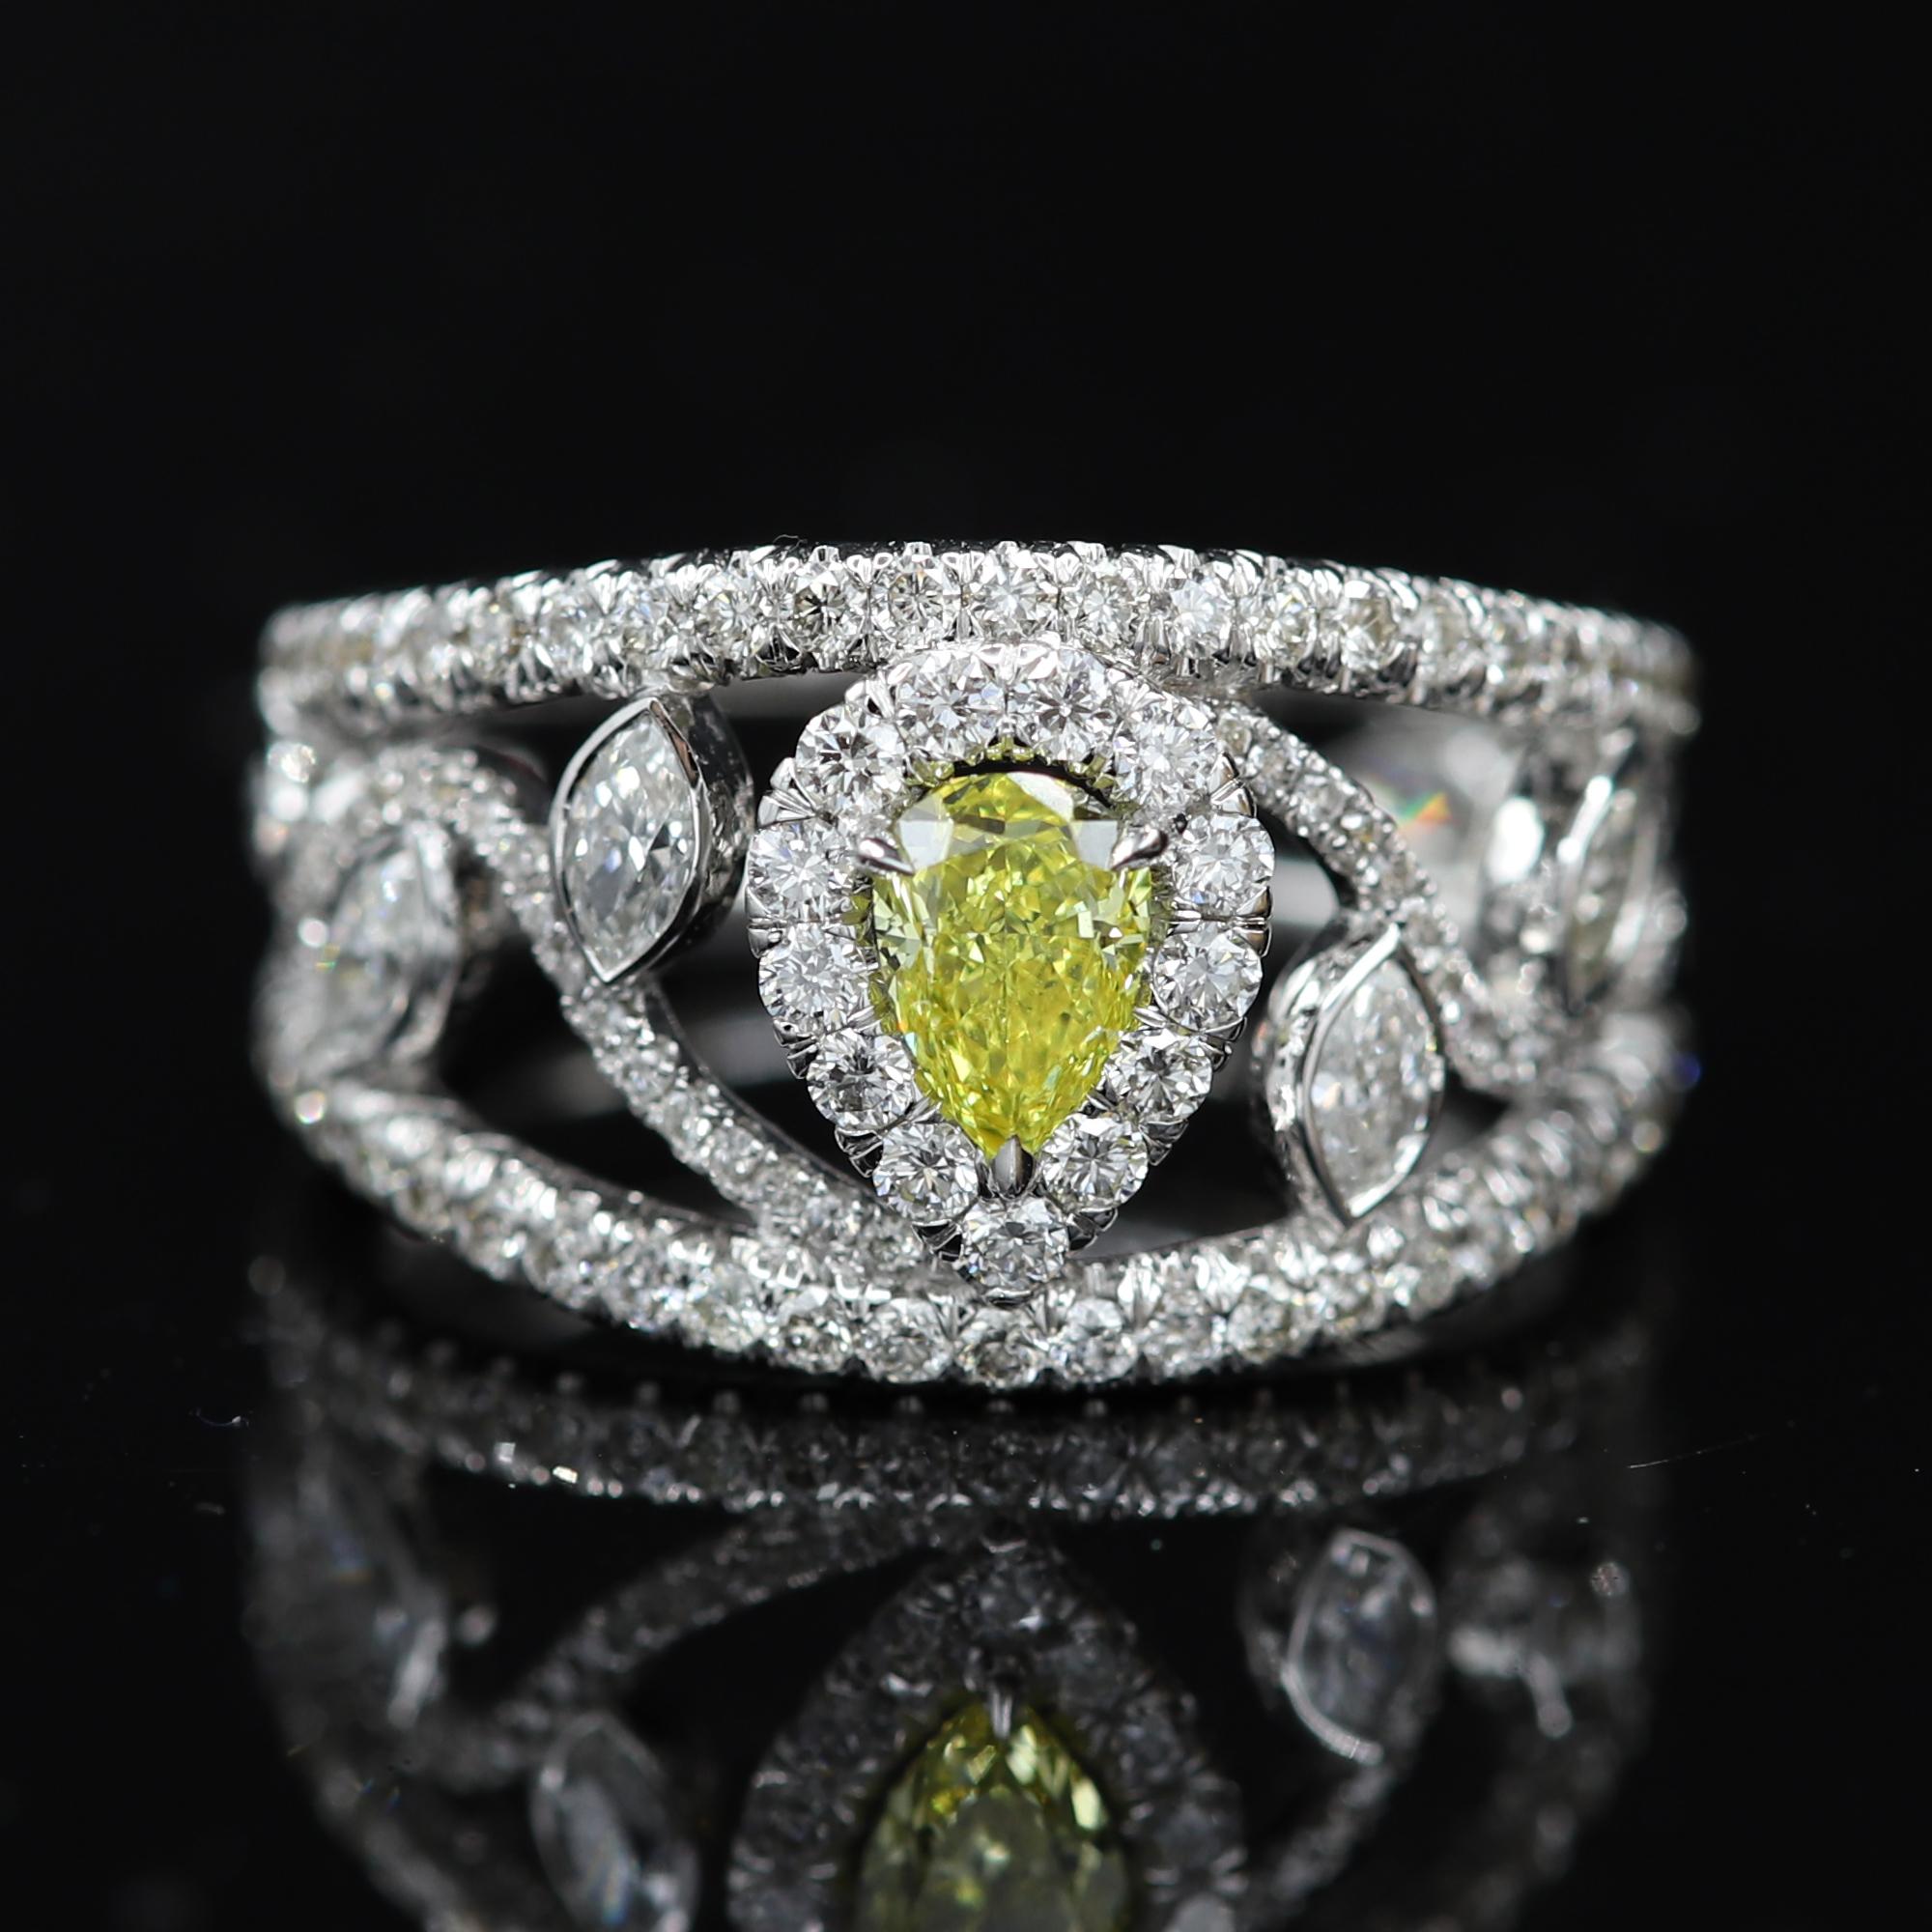 Intense Yellow Diamond- Pear shape 0.45 carat- with GIA certificate
Mix Shape Diamond Ring Band, 
18k White Gold 6.10 gram. Finger size 7
Total all Diamonds (exclude yellow center) 1.60 carat  G-VS
the ring is approx 13 mm wide on the top